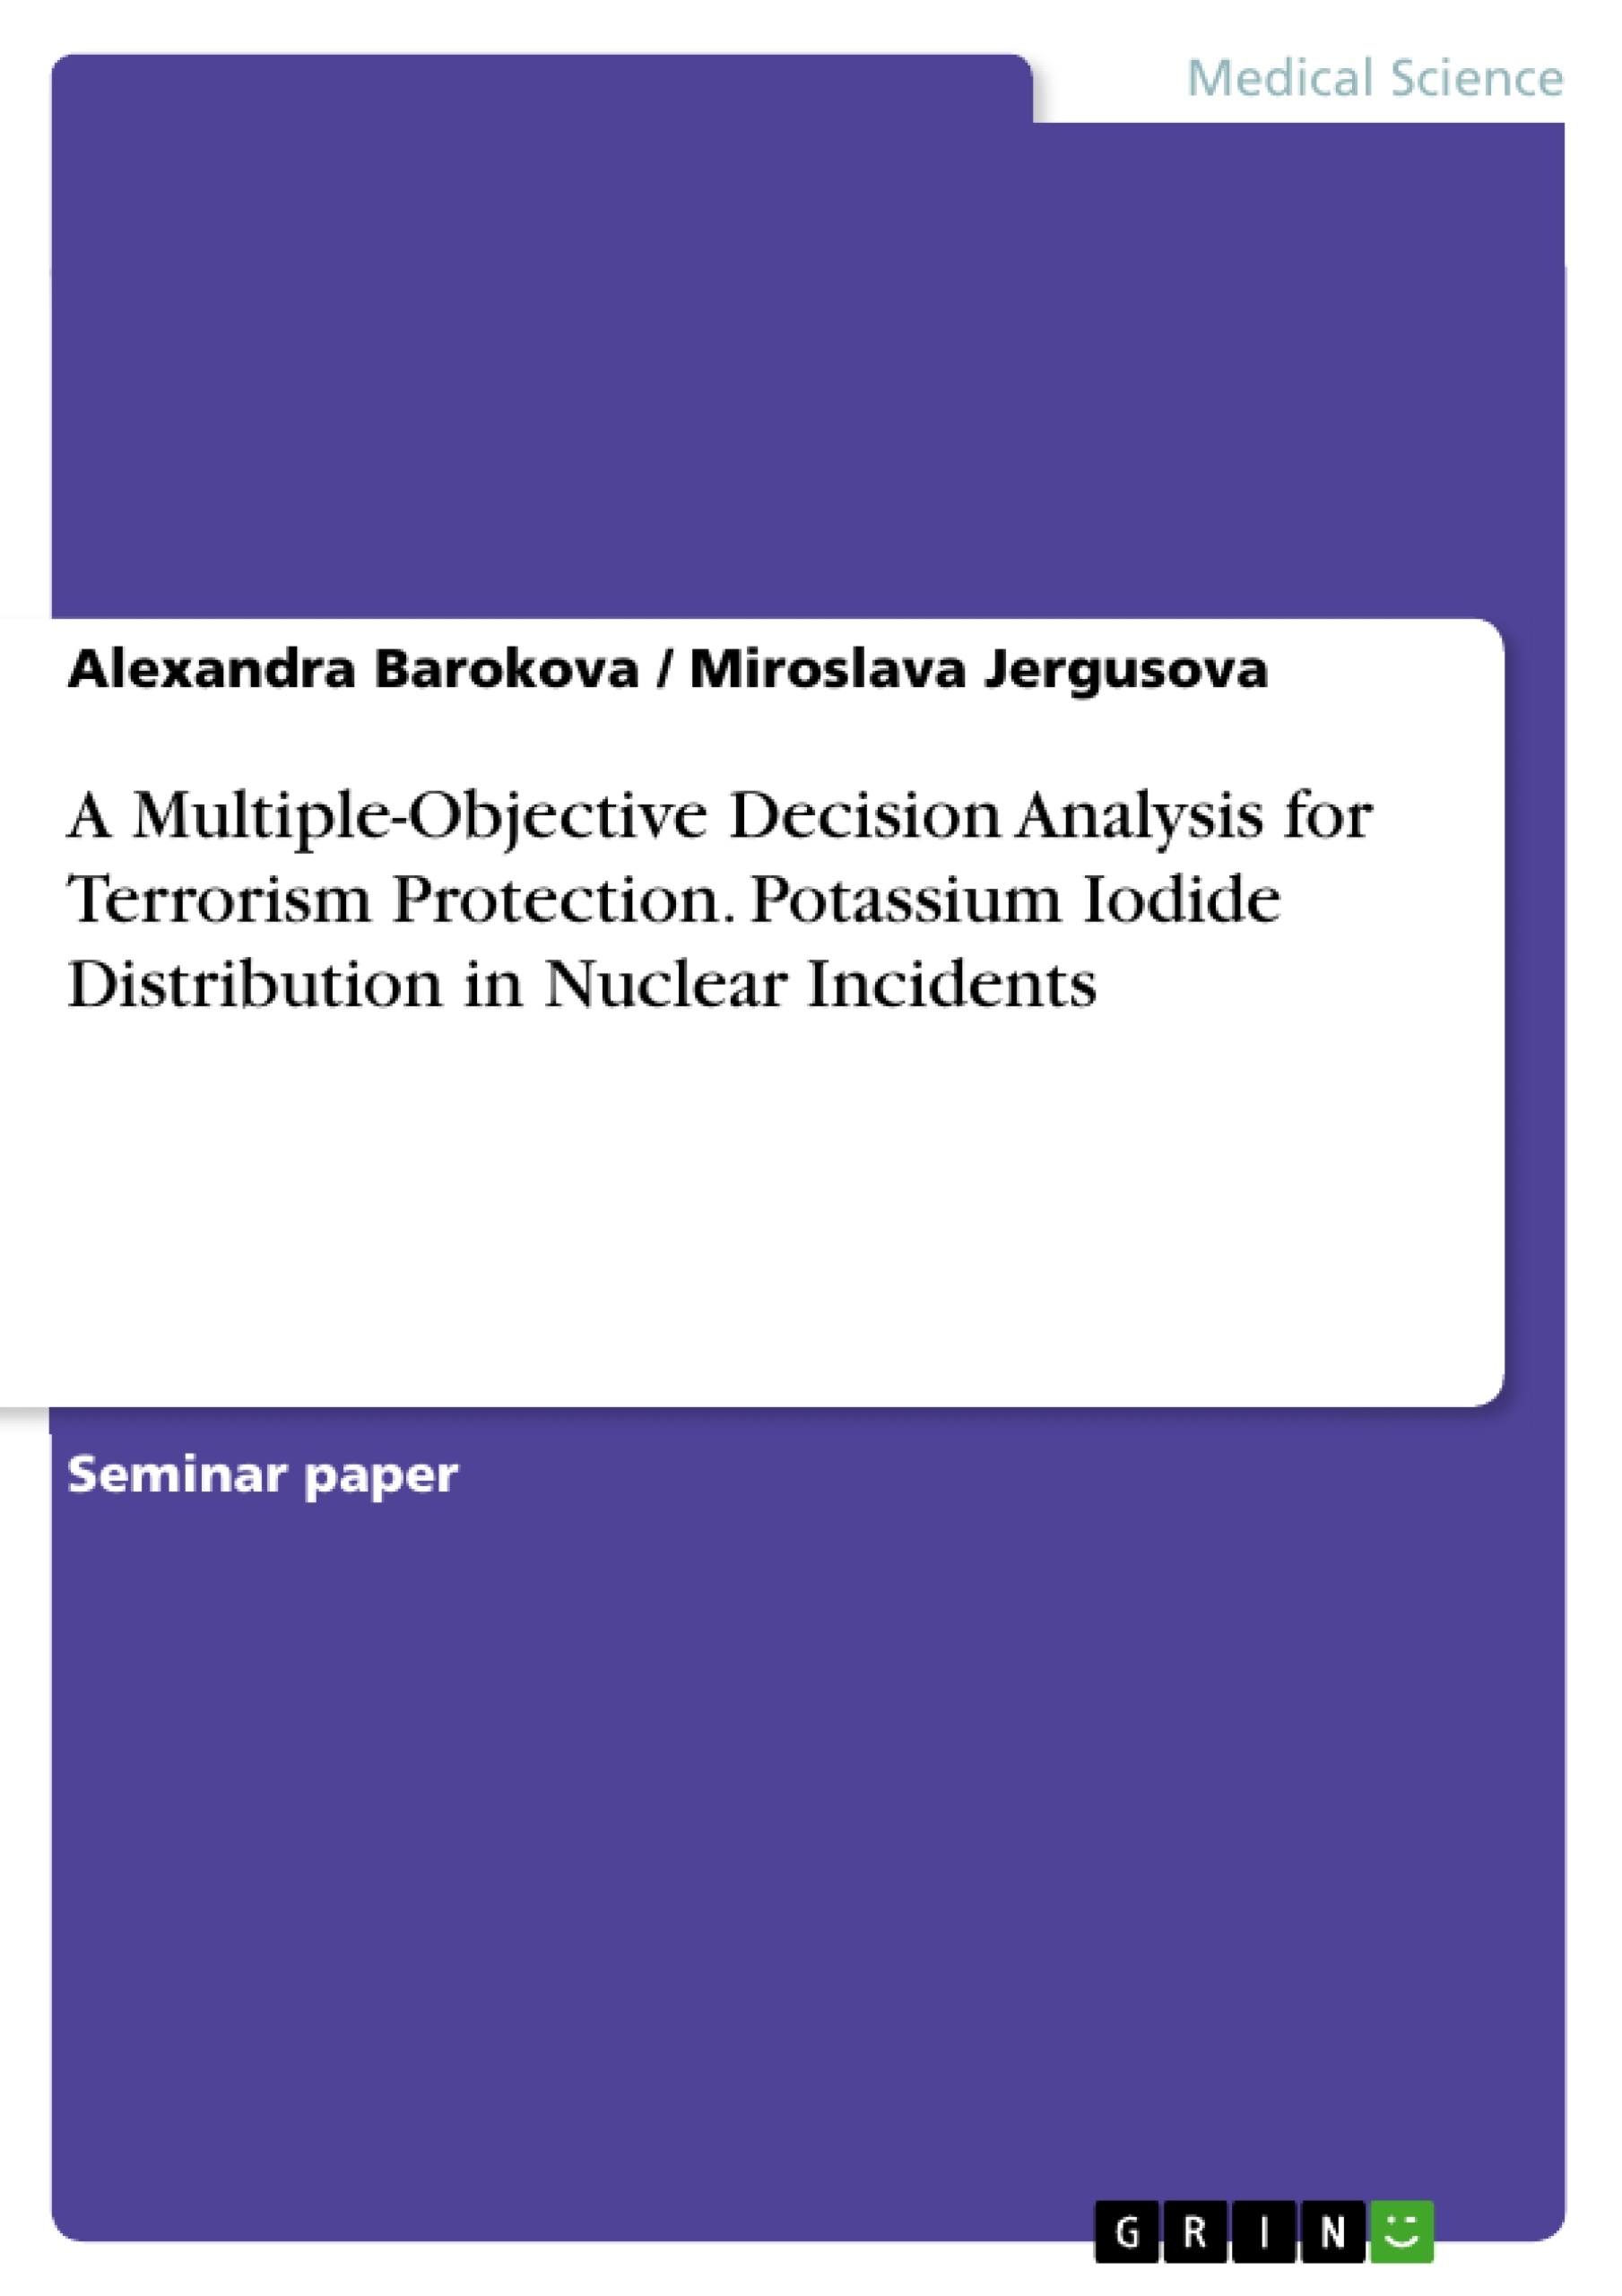 Titre: A Multiple-Objective Decision Analysis for Terrorism Protection. Potassium Iodide Distribution in Nuclear Incidents